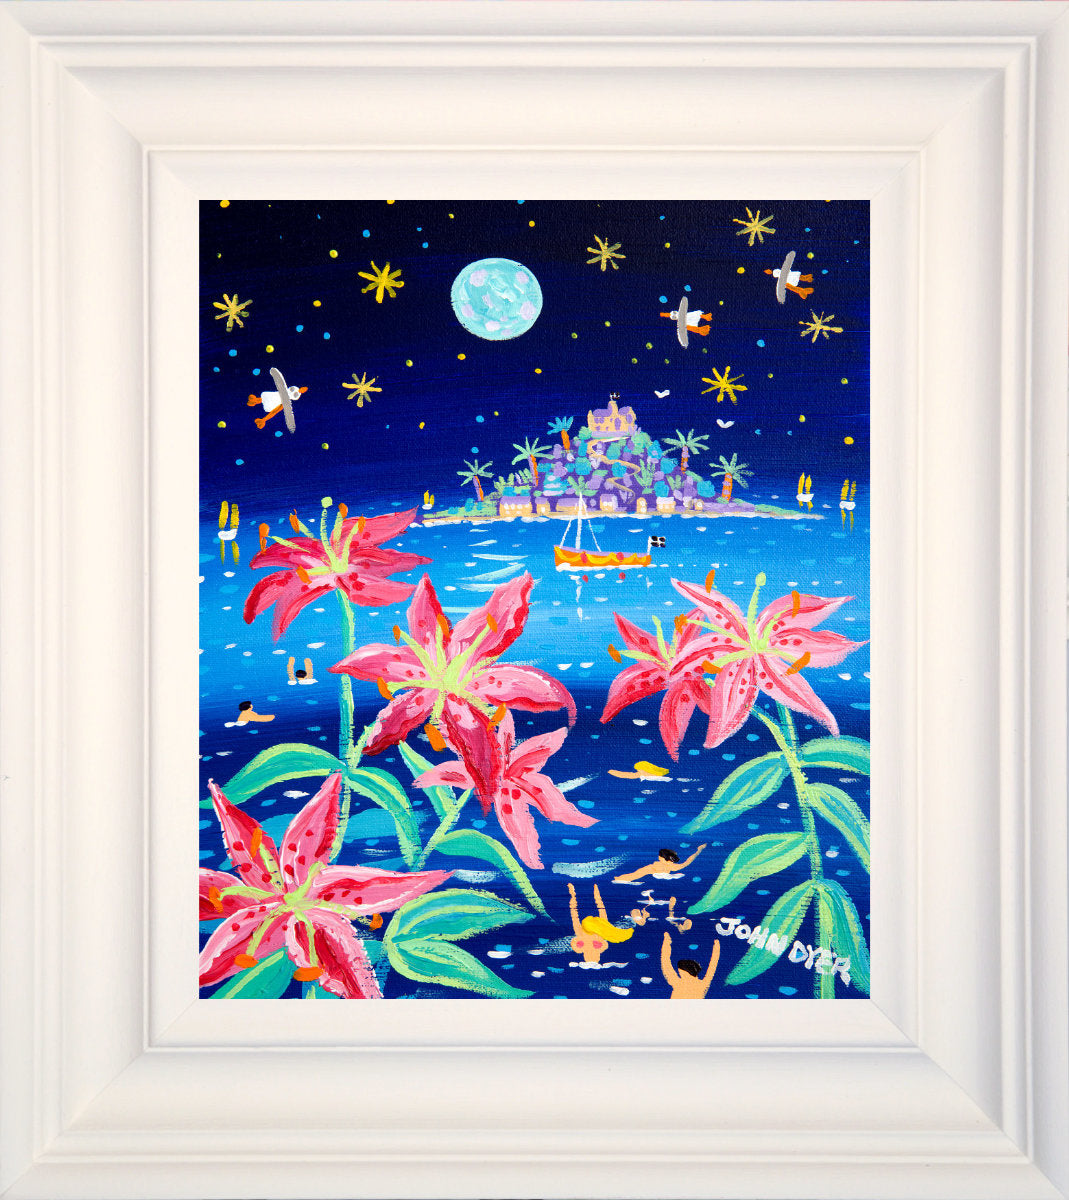 Cornwall Art Gallery Painting by John Dyer. 'Full Moon Pink Lilies, St Michael's Mount', 12 x 10 inches acrylic on canvas.